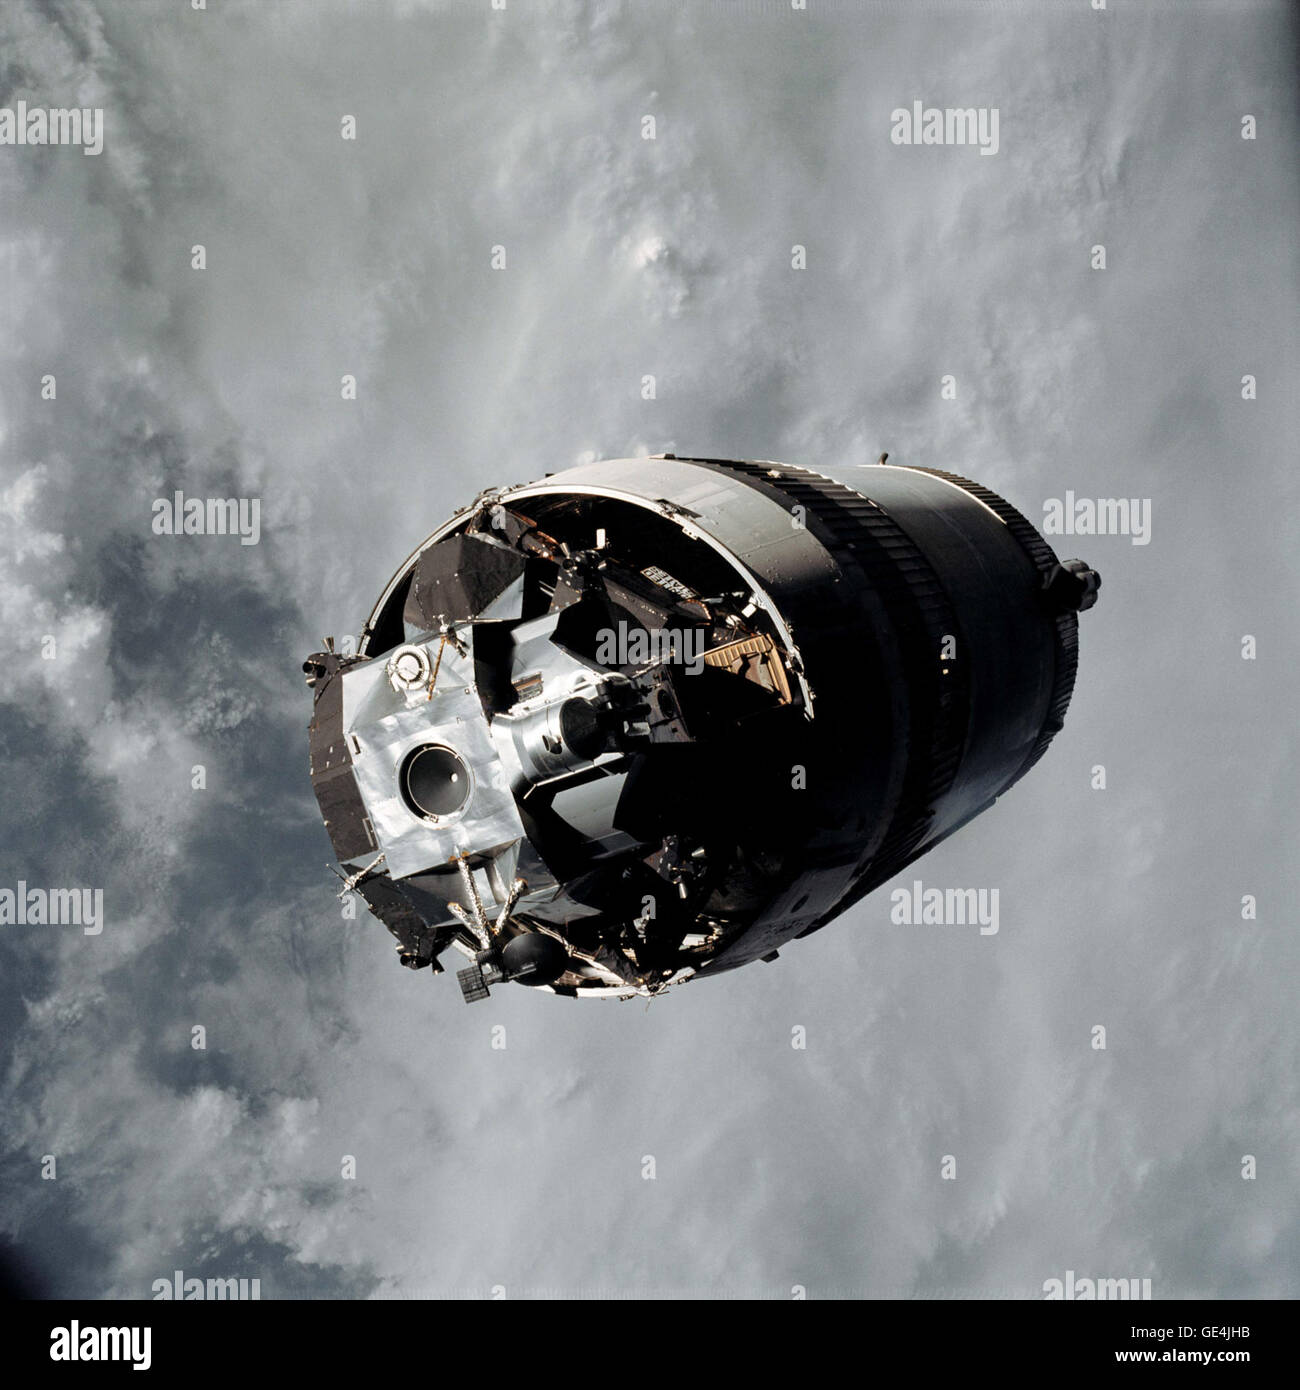 (March 3, 1969) The Lunar Module “Spider,” remains attached to the Saturn IVB stage in earth orbit prior to docking with Apollo 9’s Command/Service Module, “Gumdrop.” The photo was taken following separation of the CSM from the S-IVB stage, and the Spacecraft Lunar Module Adapter (SLA) panels have already been jettisoned. Following a March 3, 1969 launch, Apollo 9’s crew of James McDivitt, Dave Scott, and Rusty Schweickart spent 10 days testing the Lunar Module and Command and Service Modules in Earth orbit. Apollo 9 was the first mission to dock the CSM with the LEM, and the astronauts paved Stock Photo